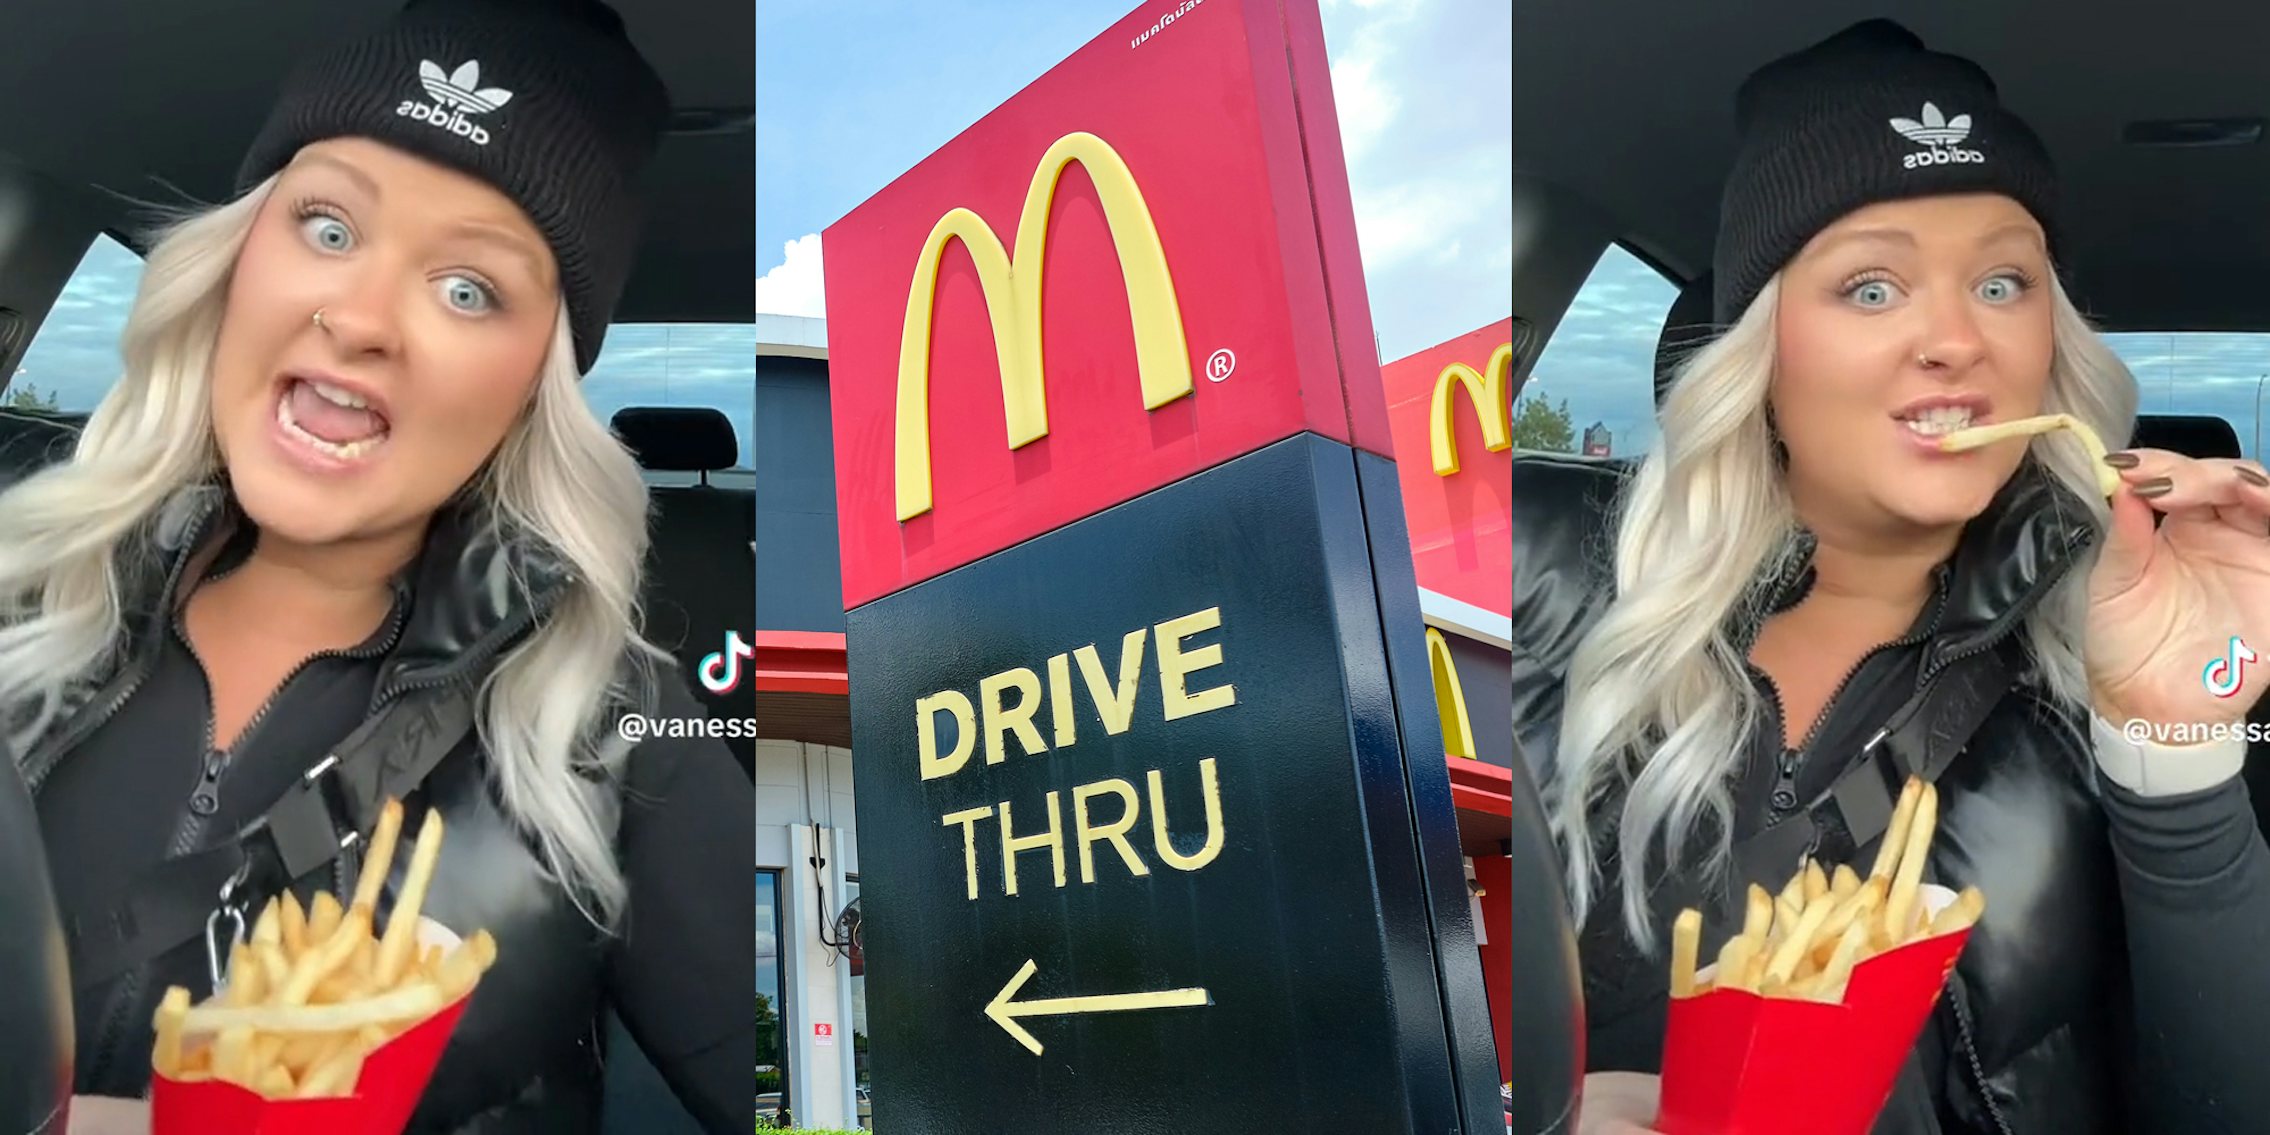 Woman talking while holding fries(l+r), McDonald's drive thru sign(c)